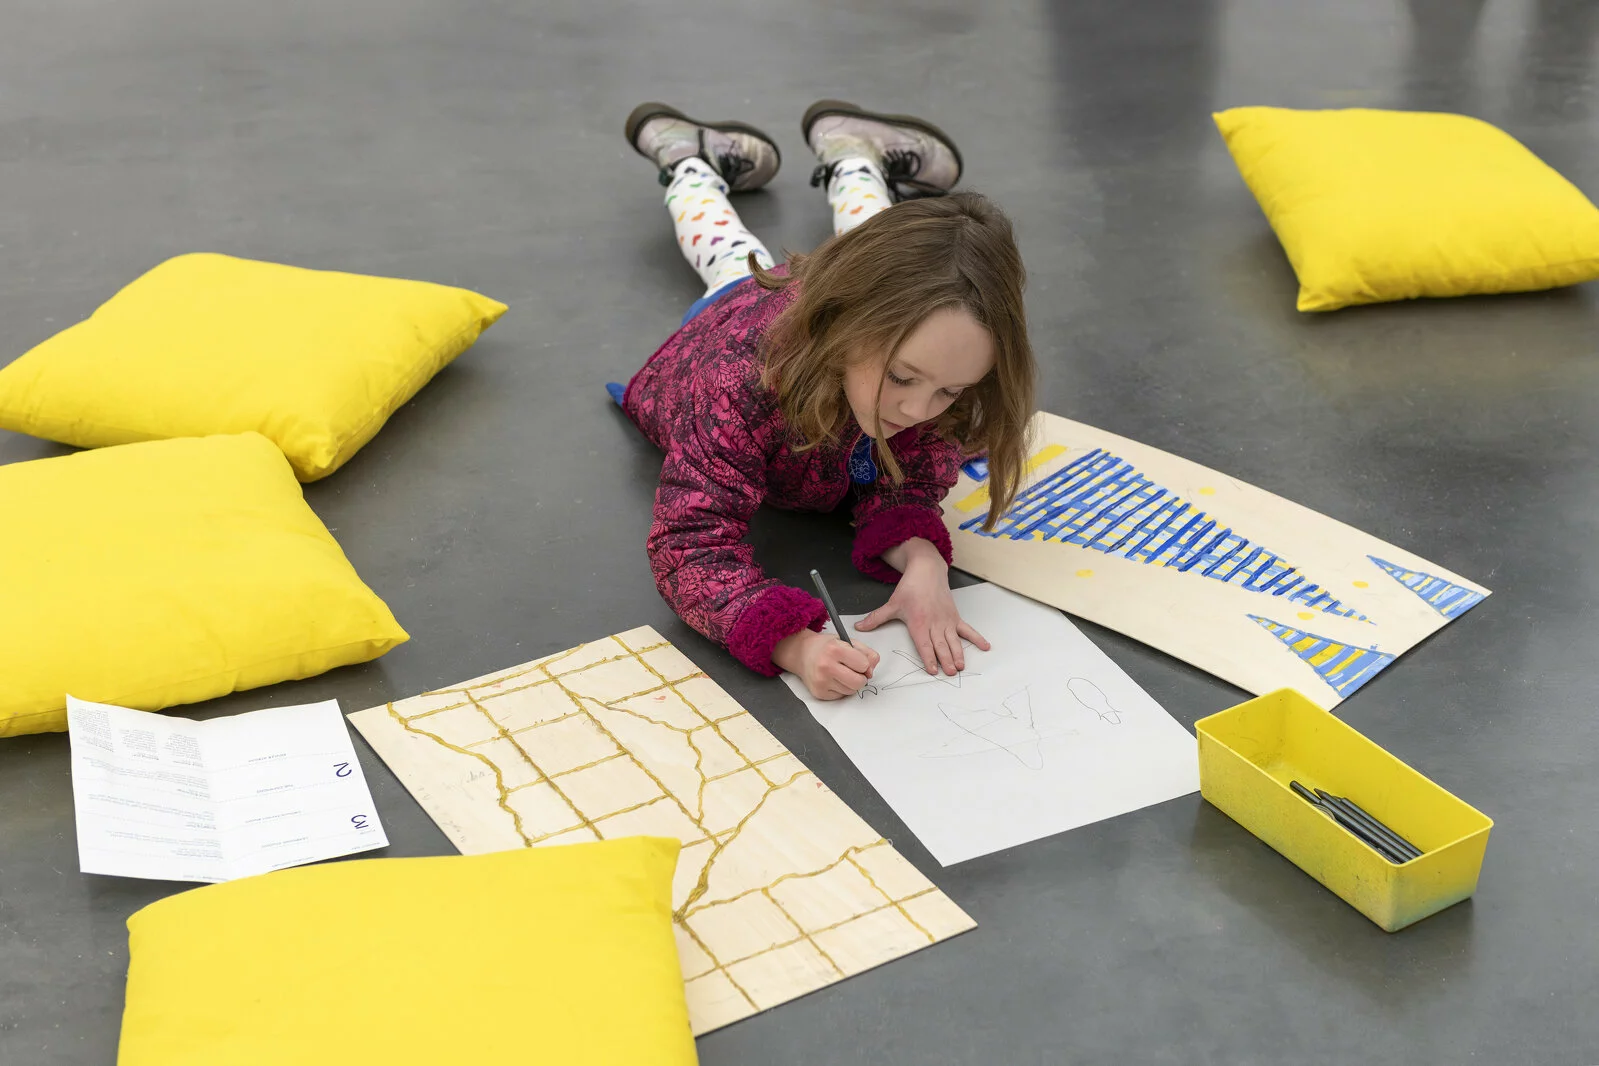 A child lays on a concrete floor and colors while surrounded by yellow pillows and sheets of paper